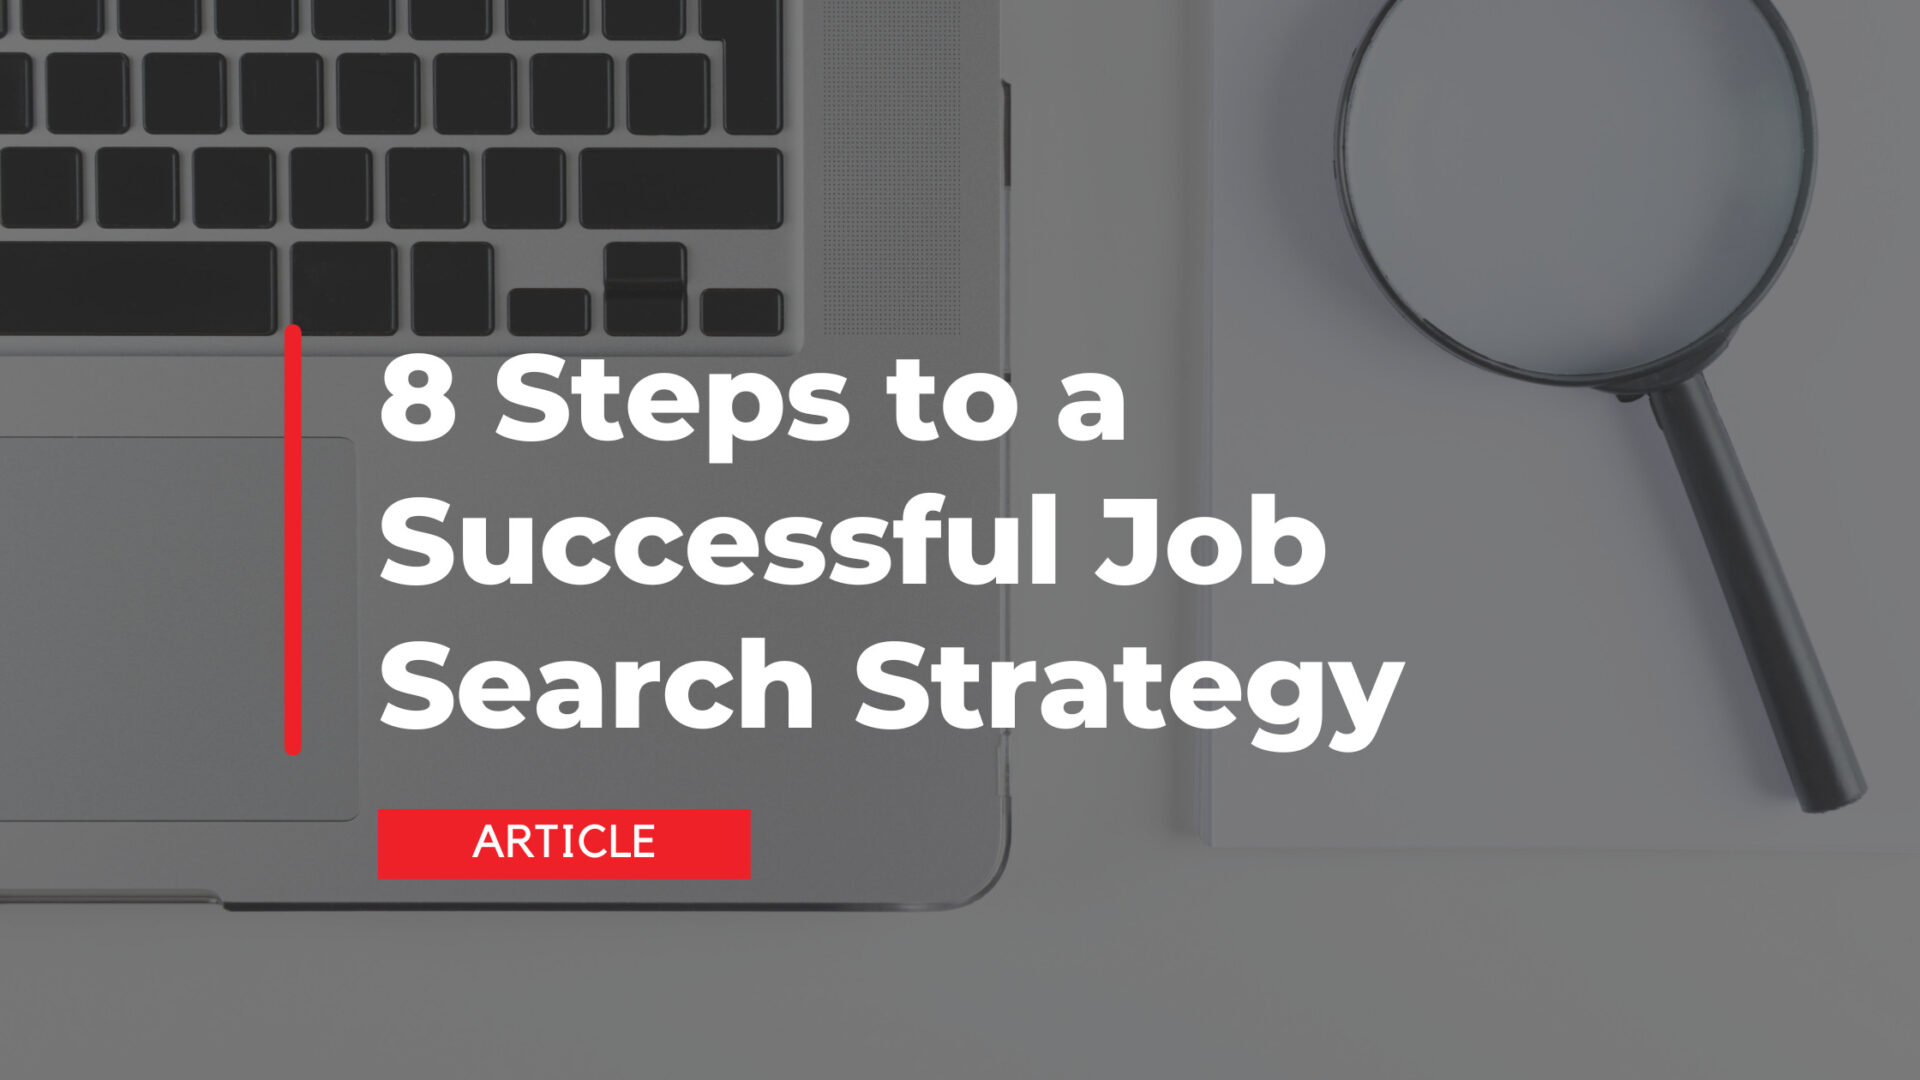 8 Steps to a Successful Job Search Strategy